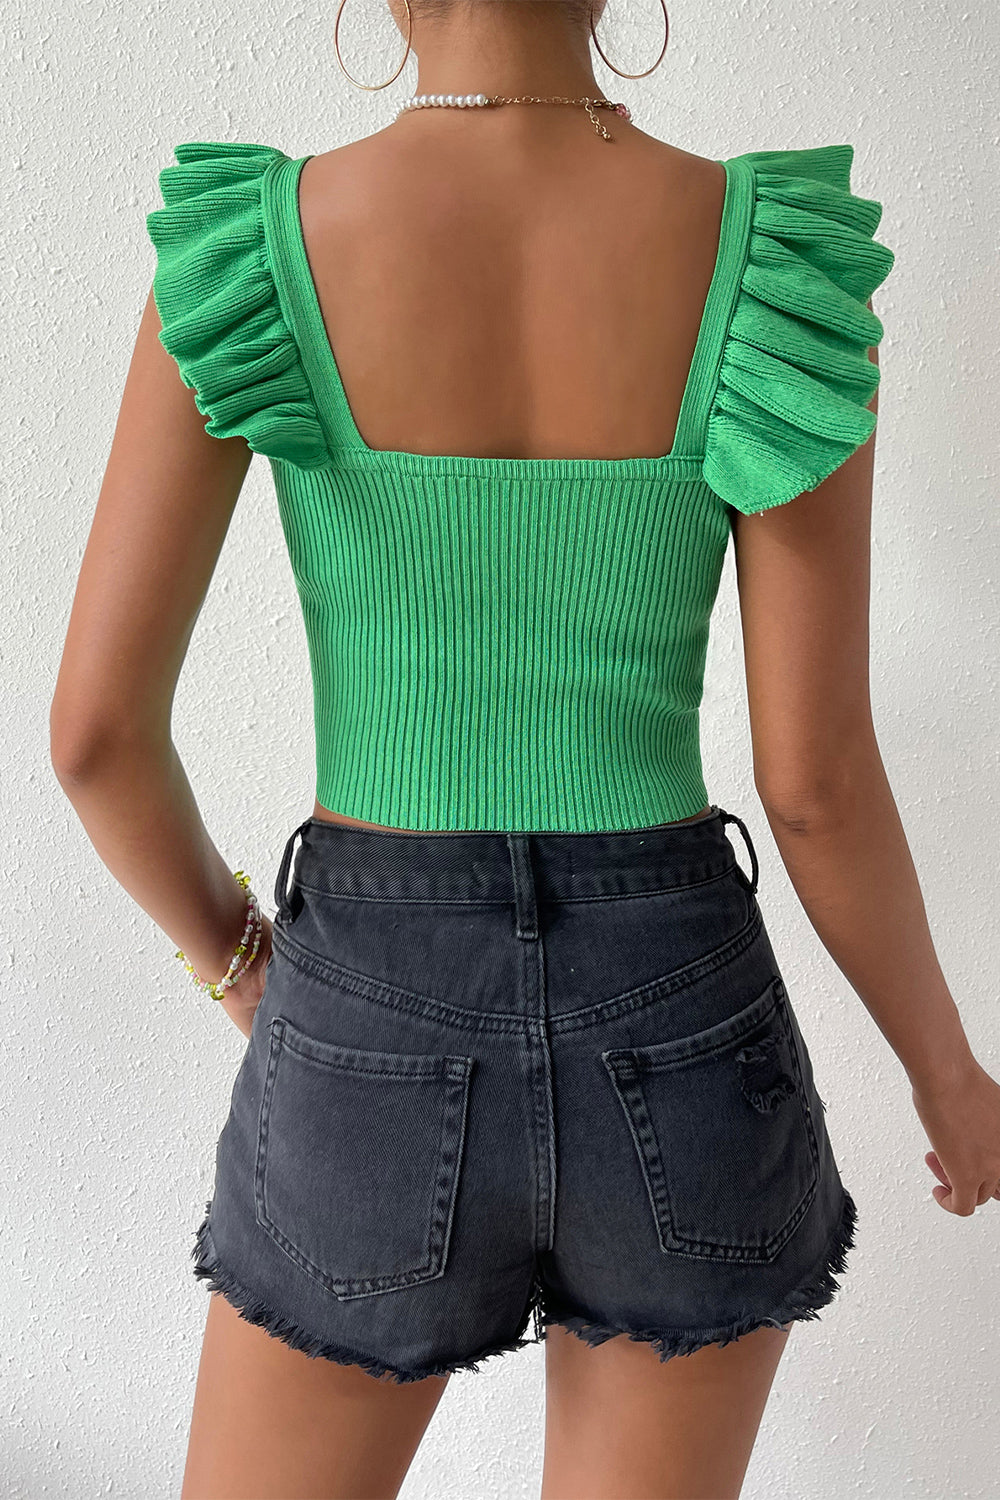 Square Neck Tie Front Knit Top - Tops & Tees - Shirts & Tops - 2 - 2024